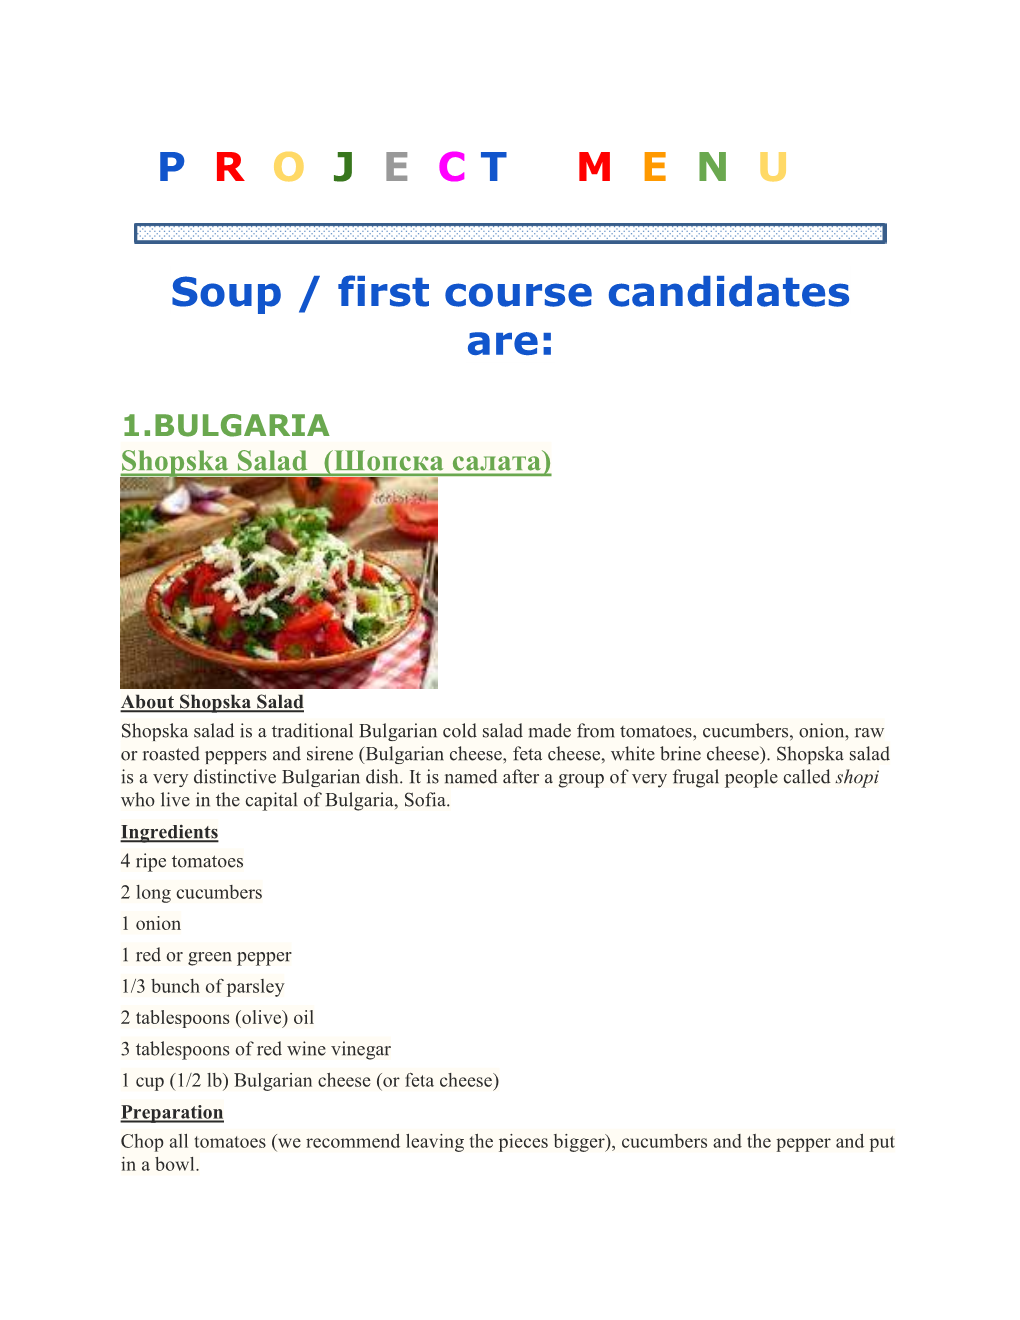 P R O J E C T M E N U Soup / First Course Candidates Are